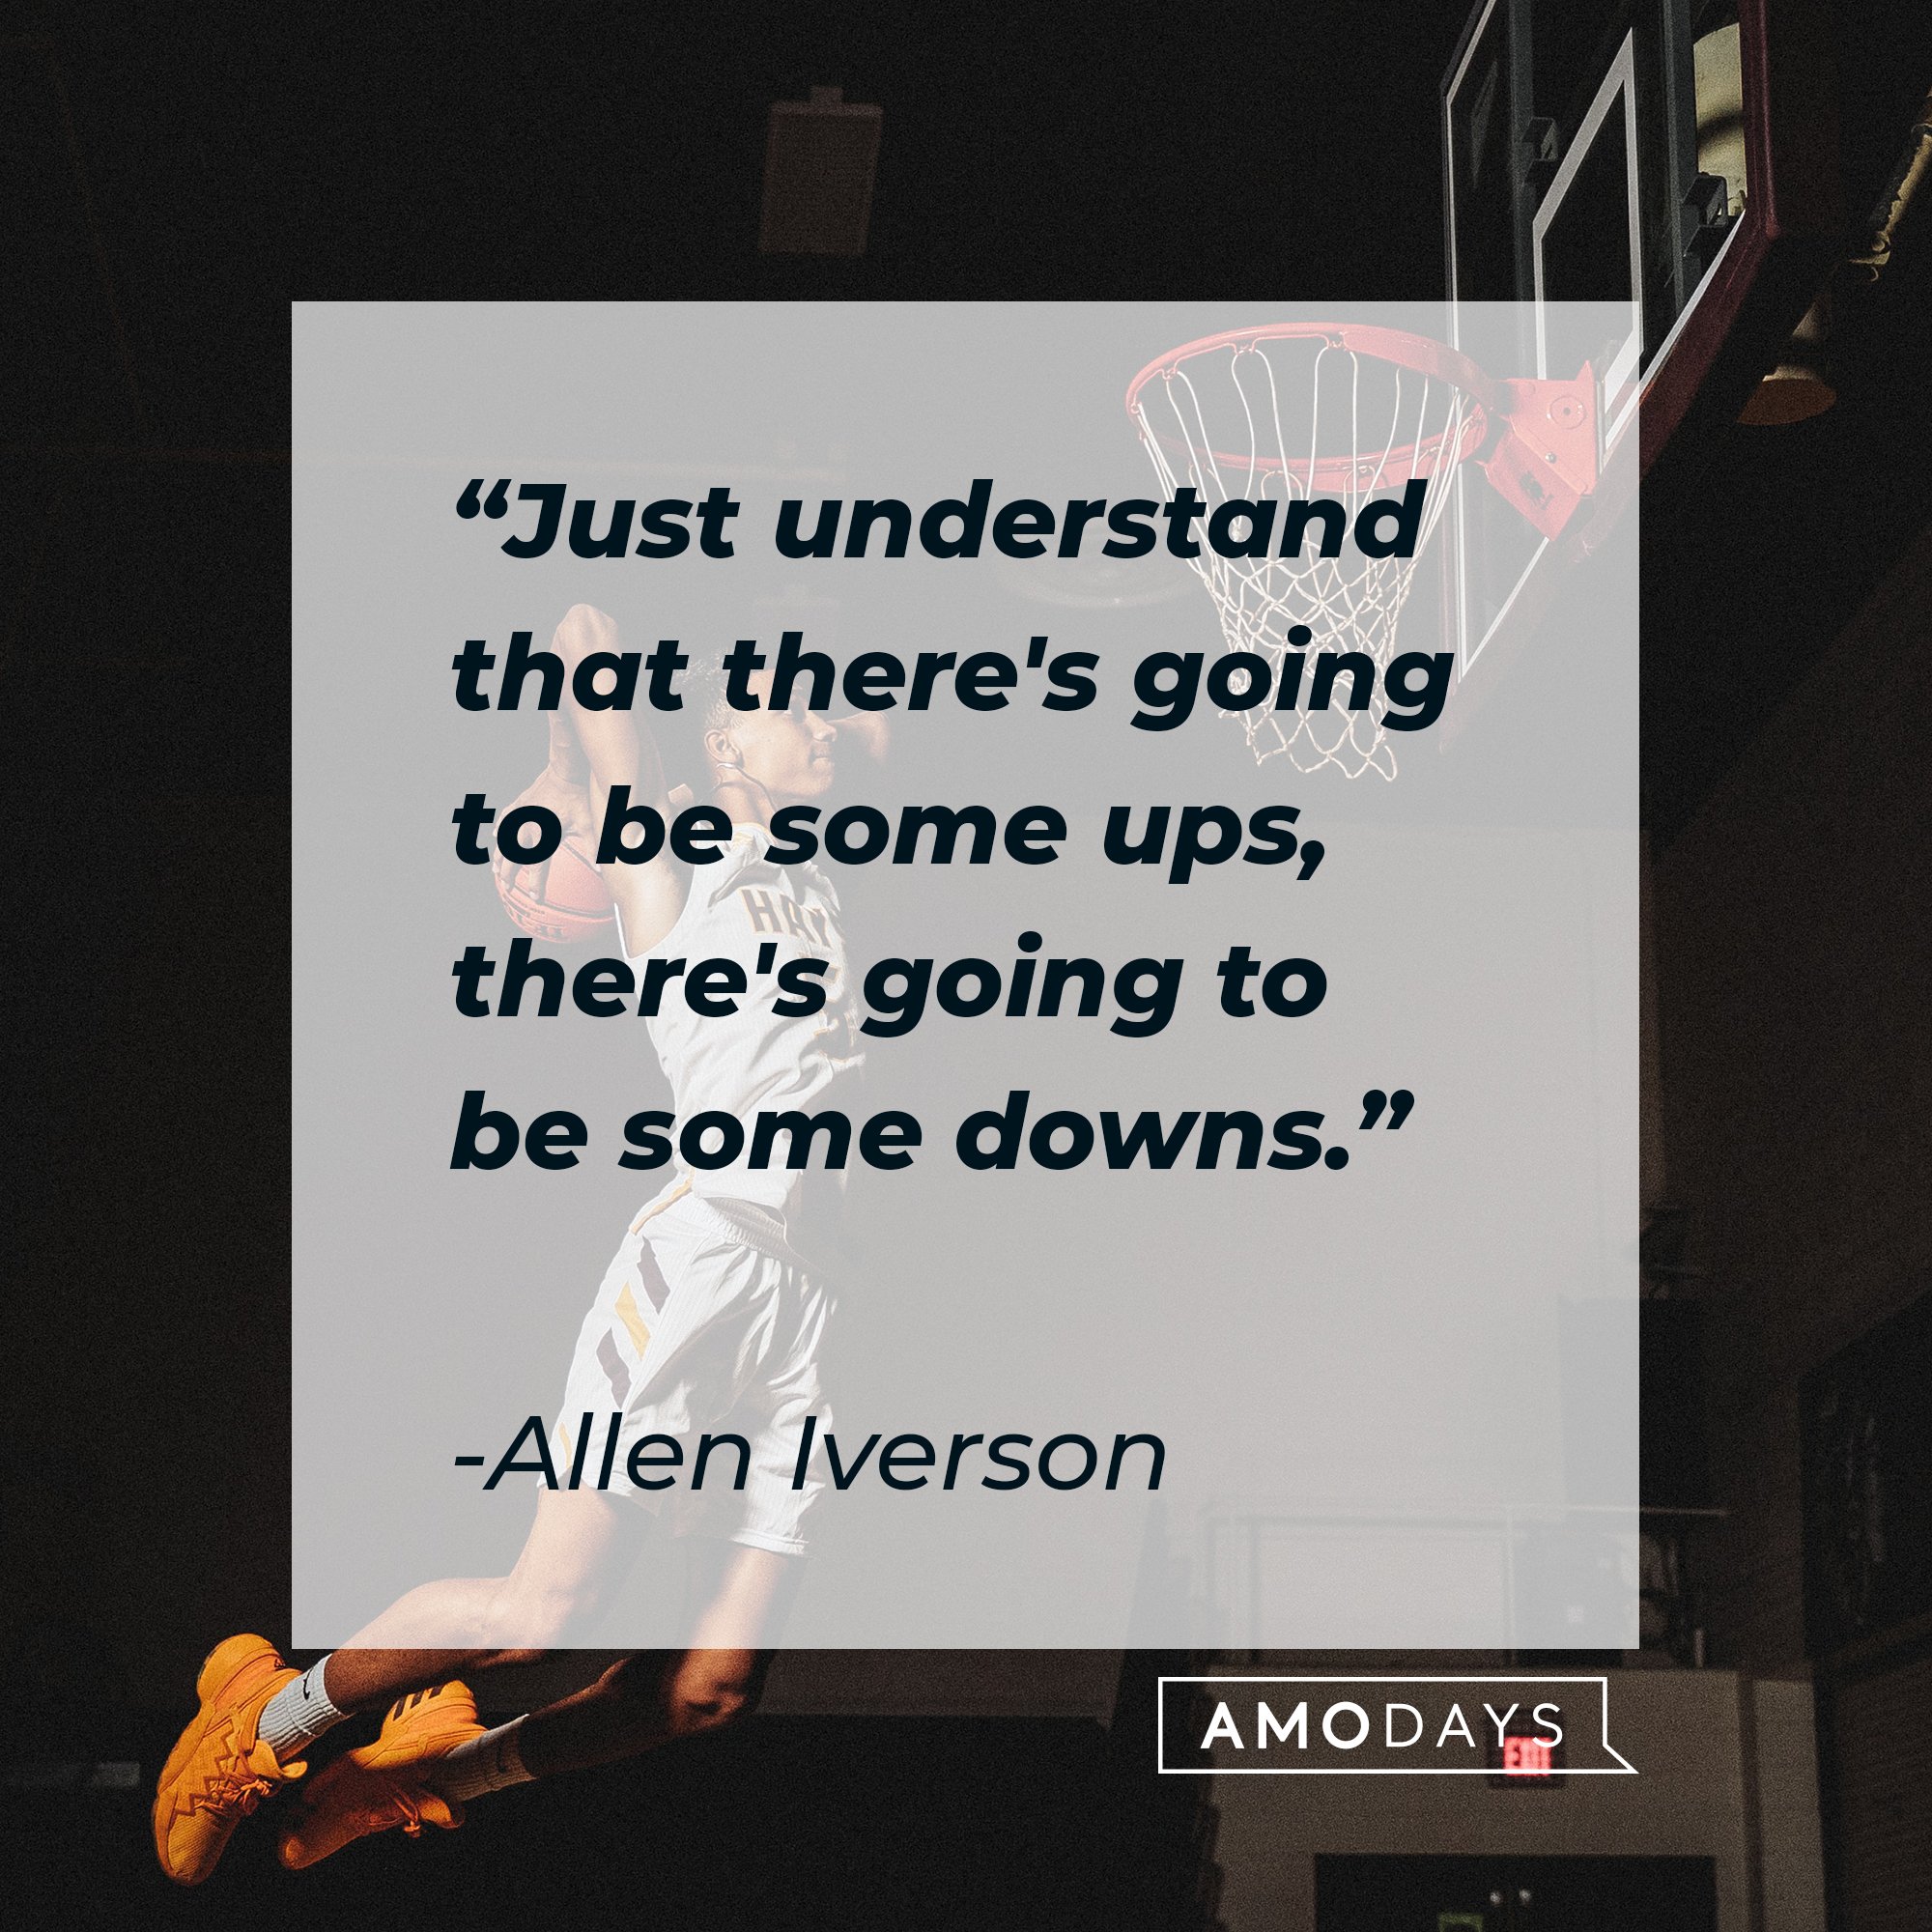 Allen Iverson's quote: "Just understand that there's going to be some ups, there's going to be some downs." | Image: AmoDays